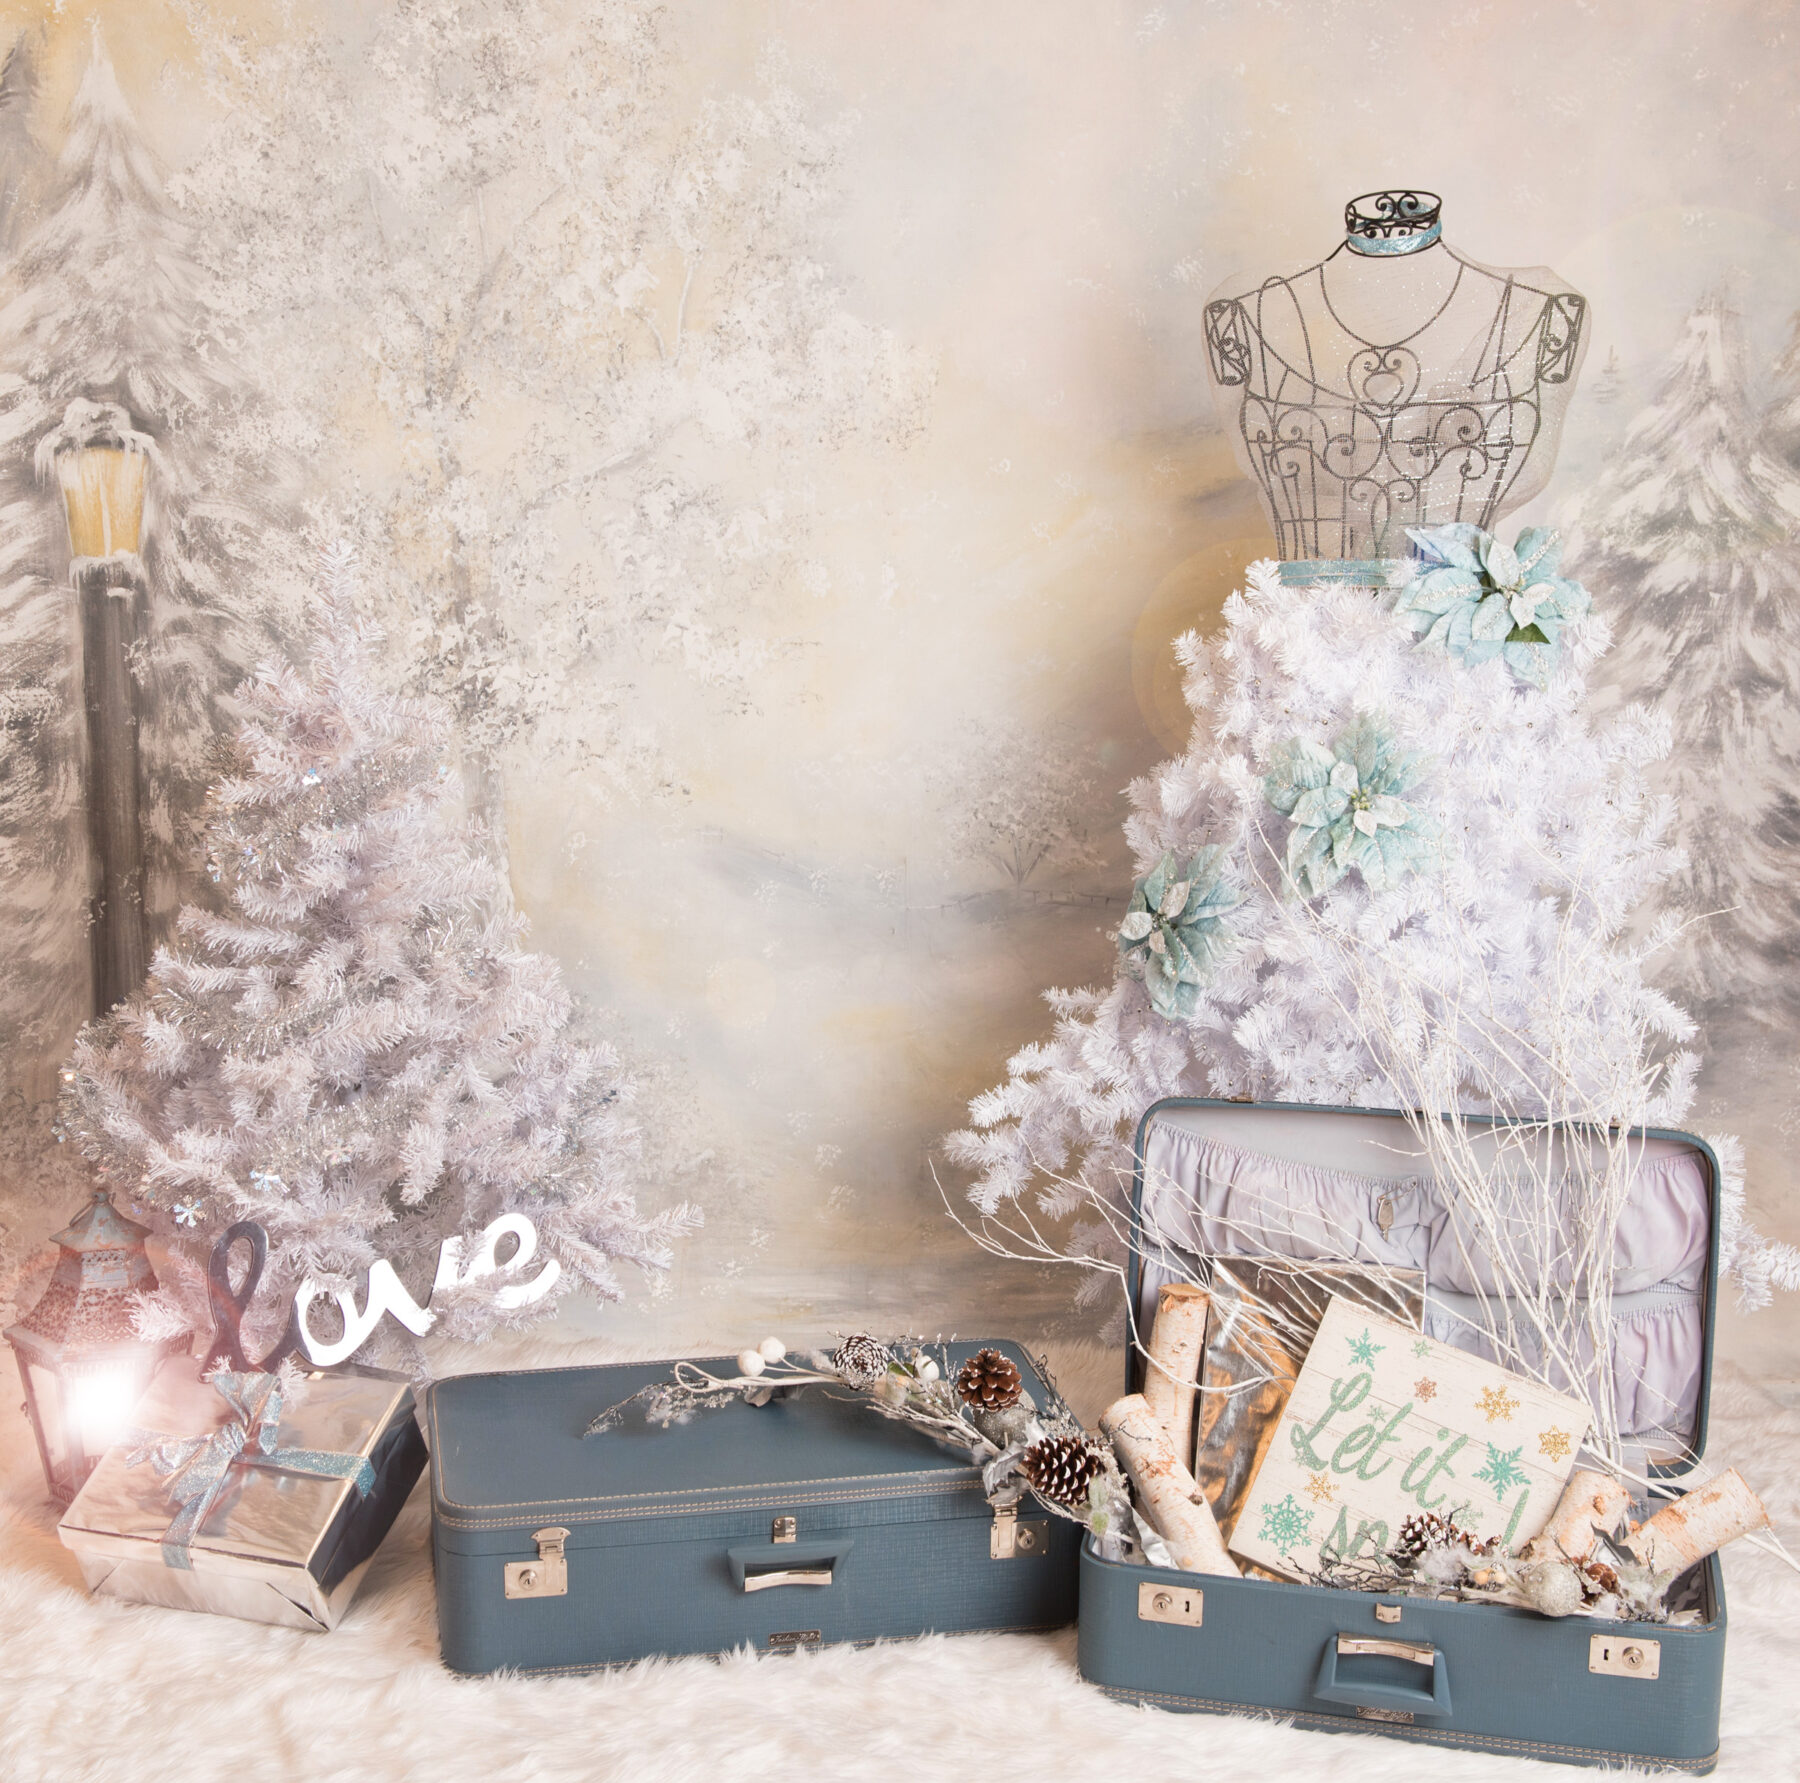 Annual Holiday Portraits * Shabby Chic, Annual Holiday Portraits &#8211; Shabby Chic